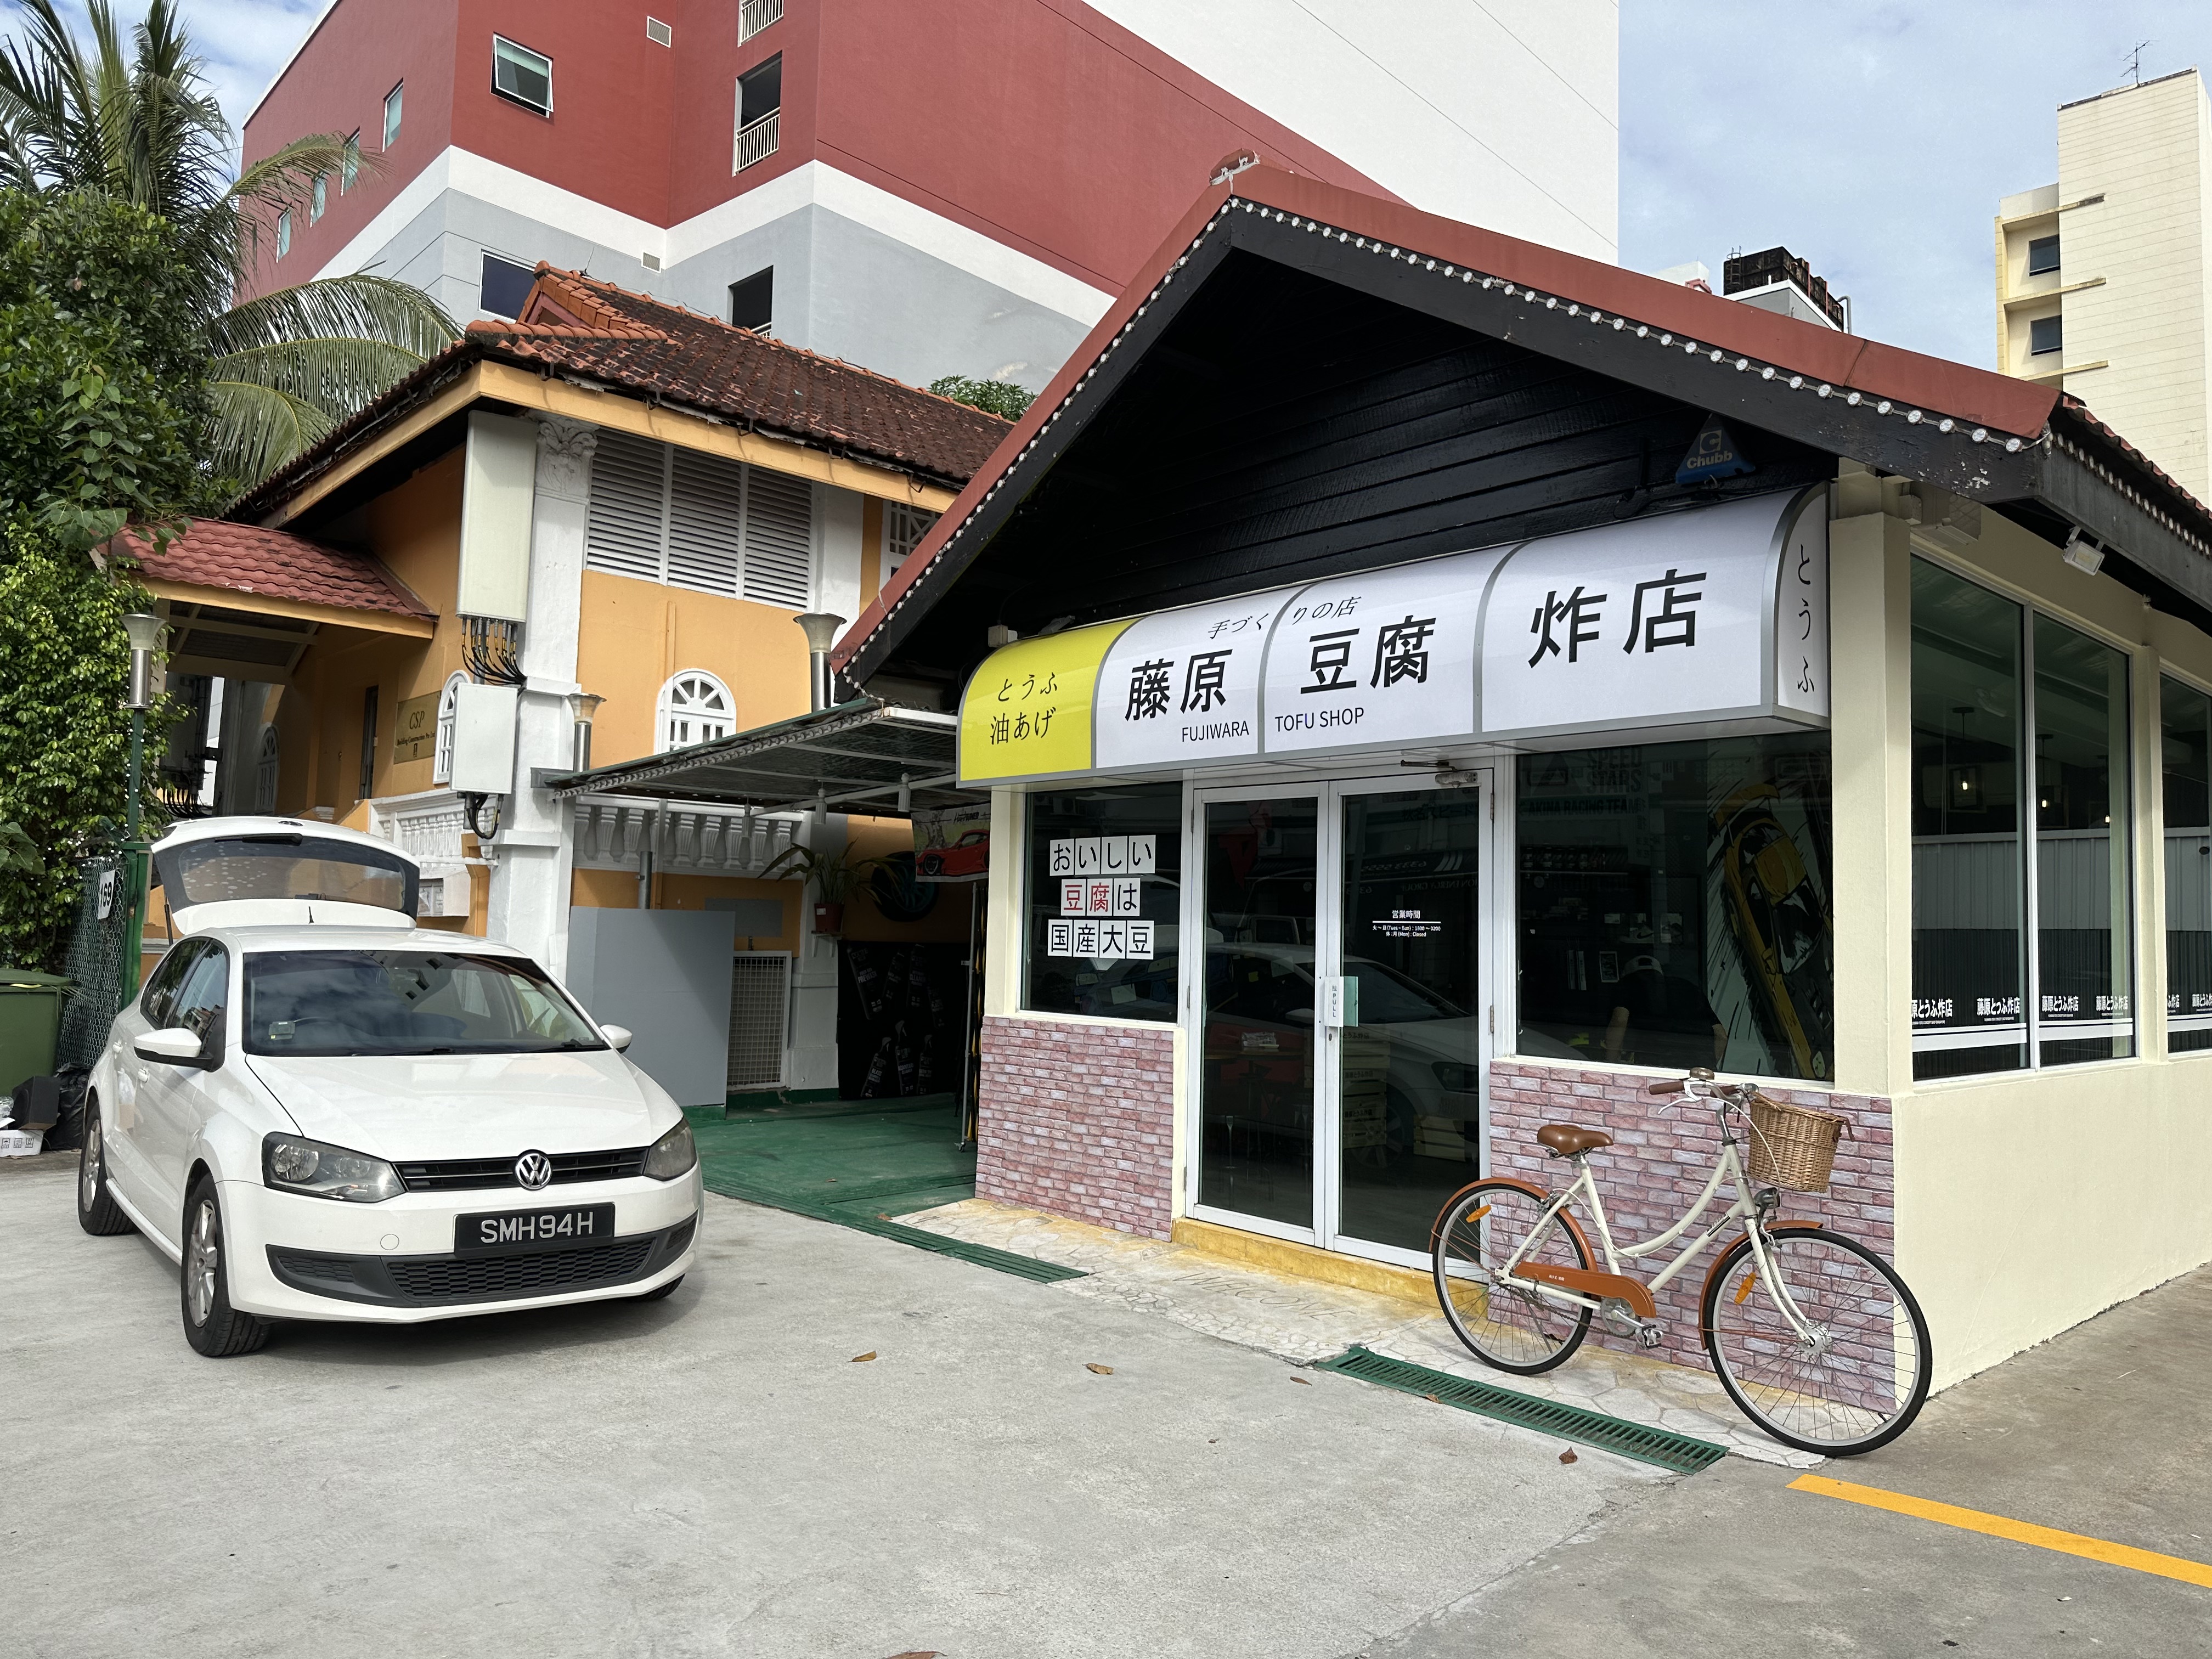 Initial D Inspired Restaurant A Hit Among Anime Fans And Car Enthusiasts